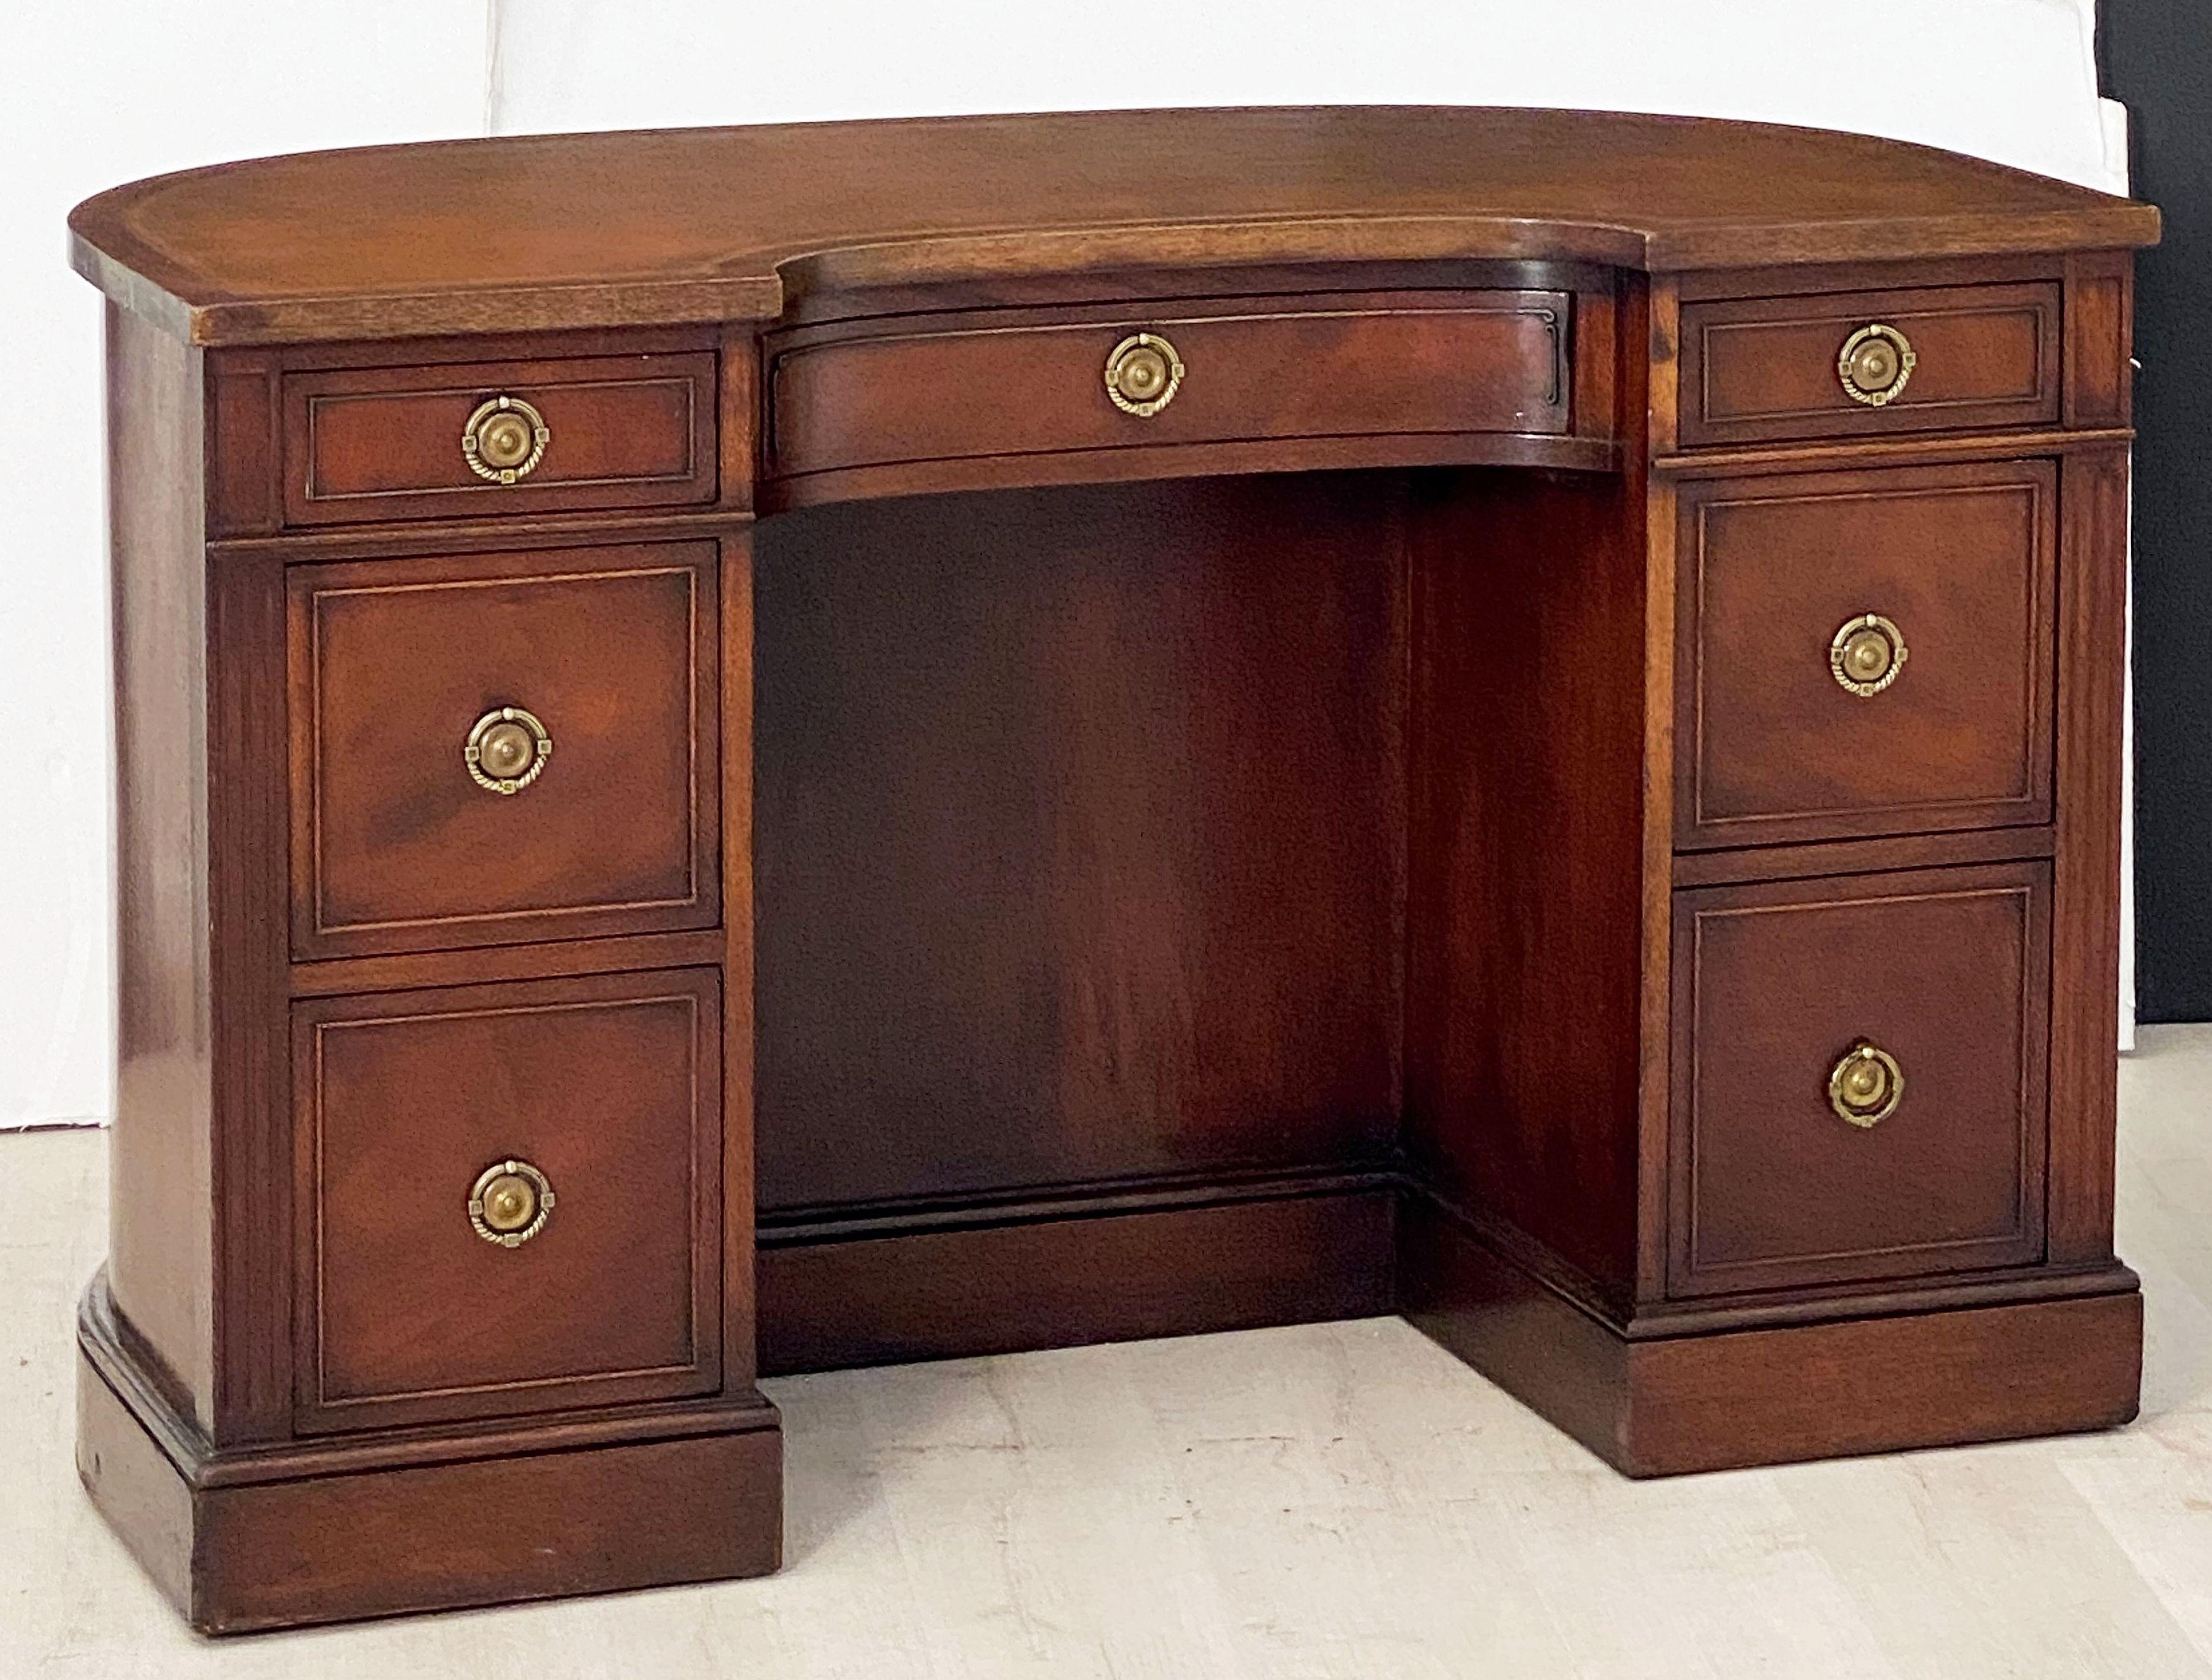 A fine English kidney shaped kneehole writing desk from the Edwardian era, featuring a demi-lune top with original leather writing surface decorated with gold tooling in a Greek Key pattern, over a frieze of seven graduated mahogany-lined drawers